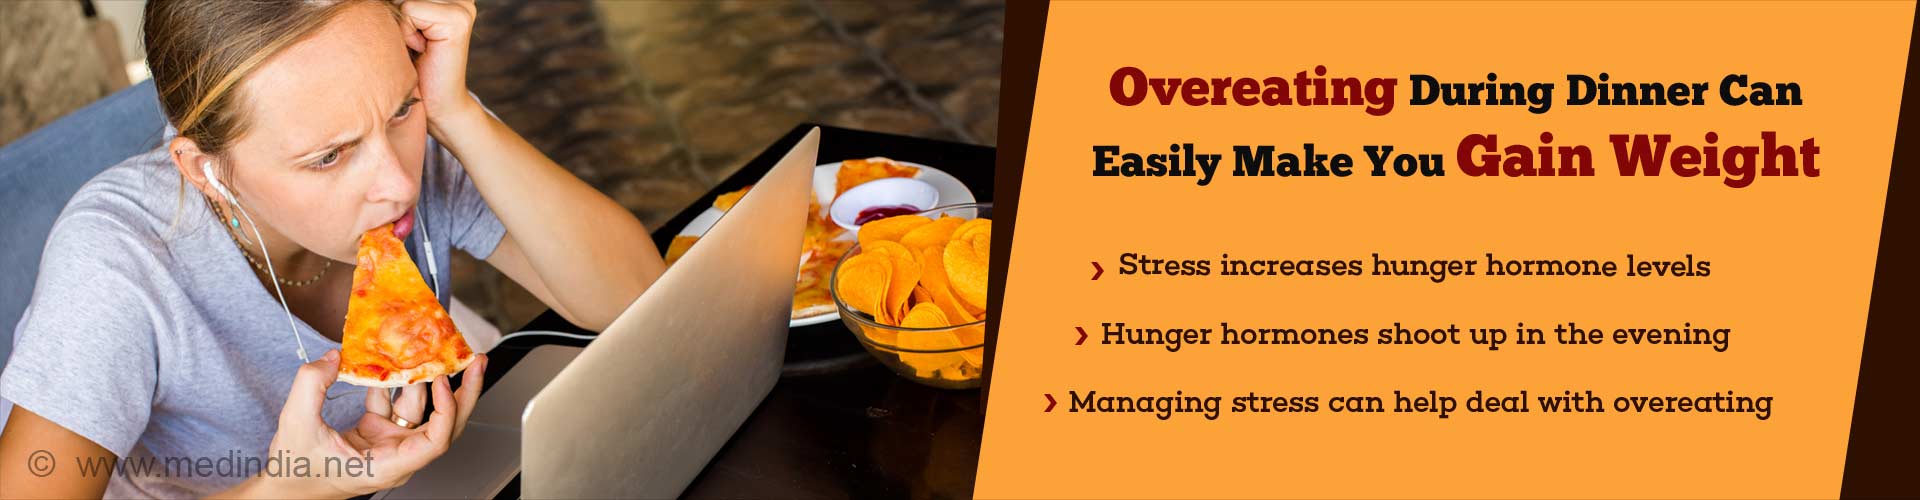 Overeating for dinner can easily make you gain weight
- stress increases hunger hormone levels
- hunger hormones shoot up in the evenings
- stress incontinence can help deal with overacting